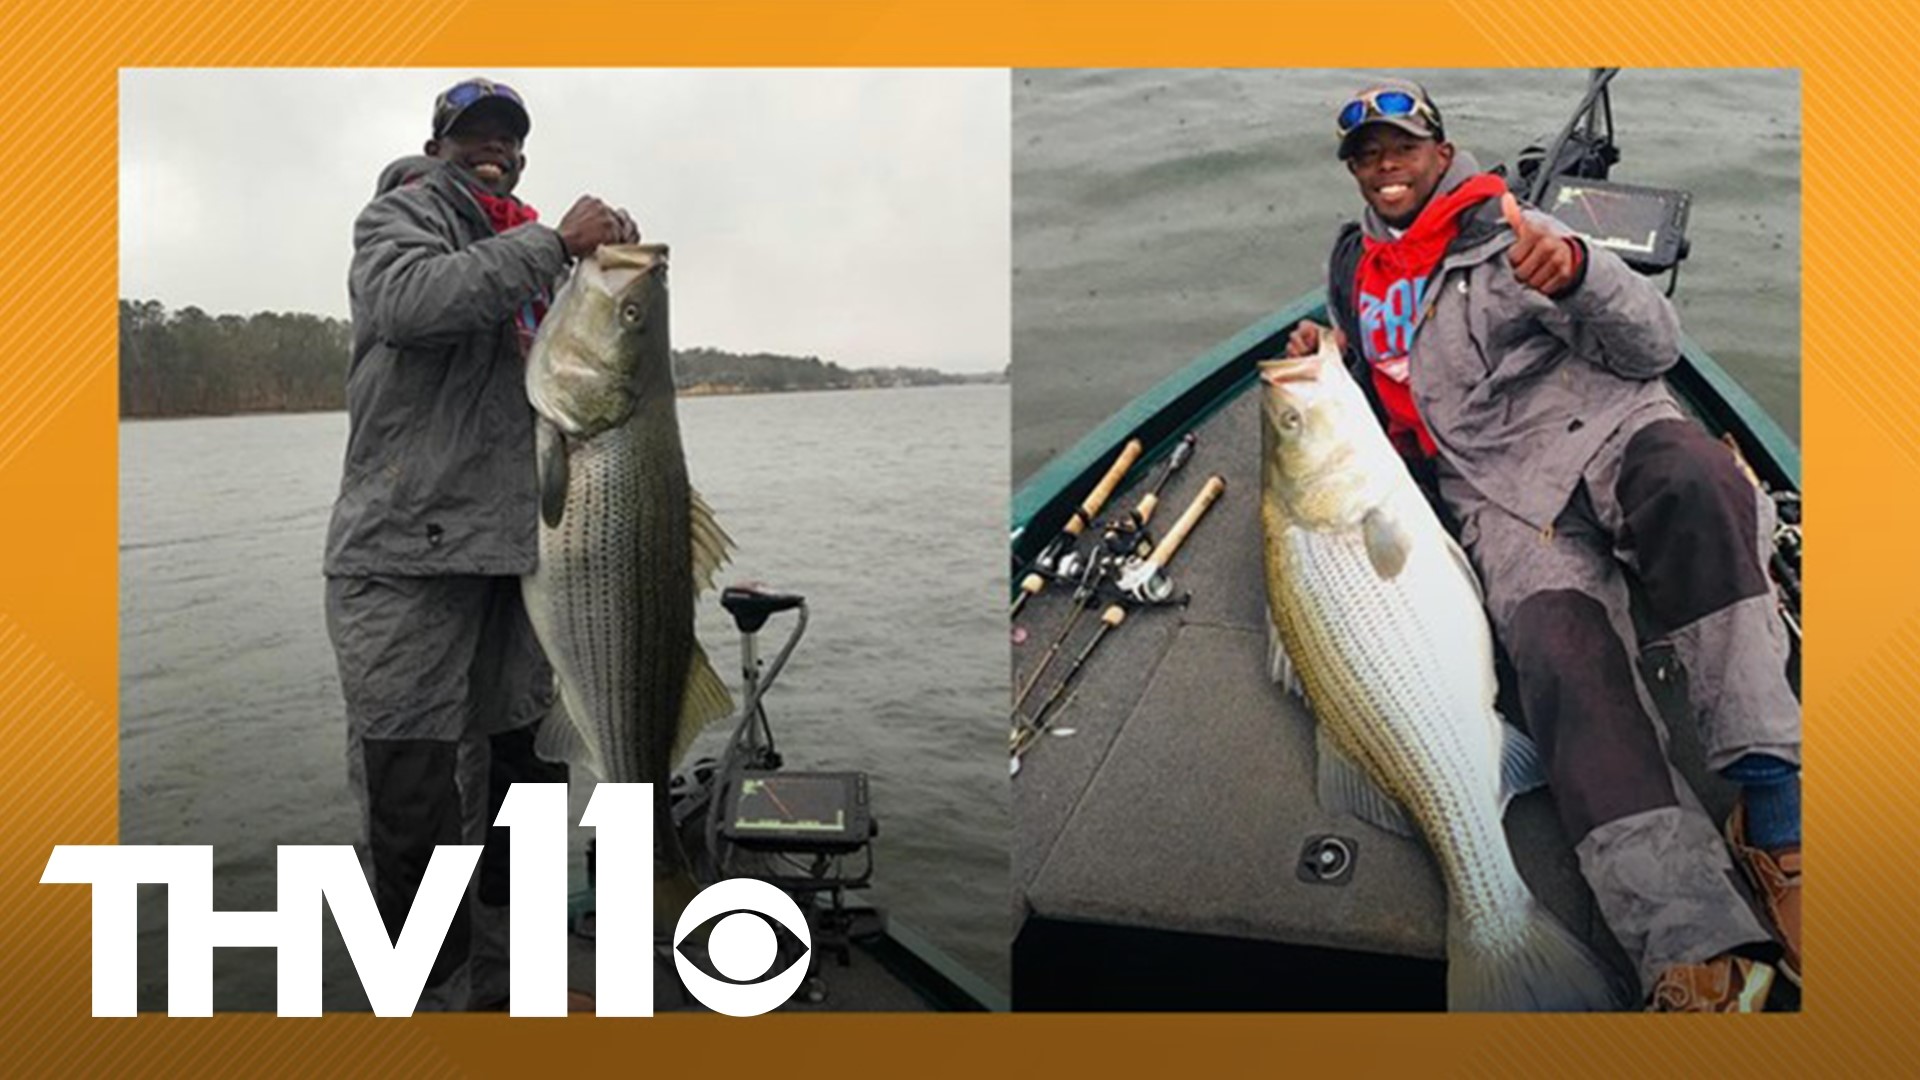 Stephen Tyson Jr. is going viral this week after catching a massive striped bass during the Phoenix Bass Fishing League tournament last weekend.